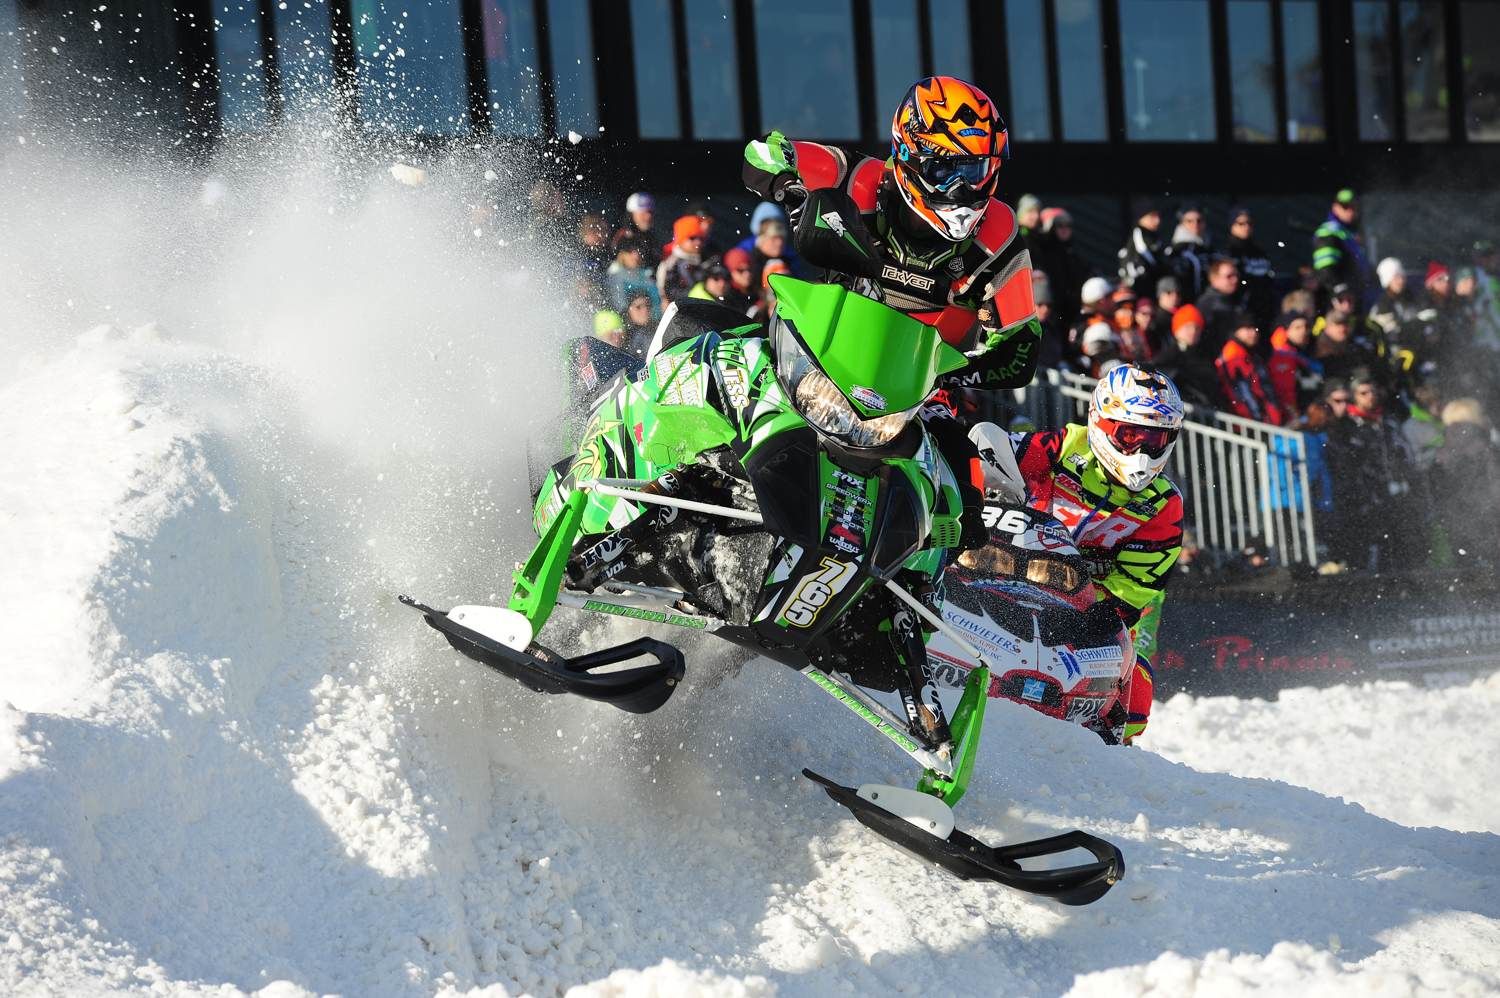 Team Arctic Cat's Montana Jess scored a pair of two's in Pro Lite. Photo by ArcticInsider.